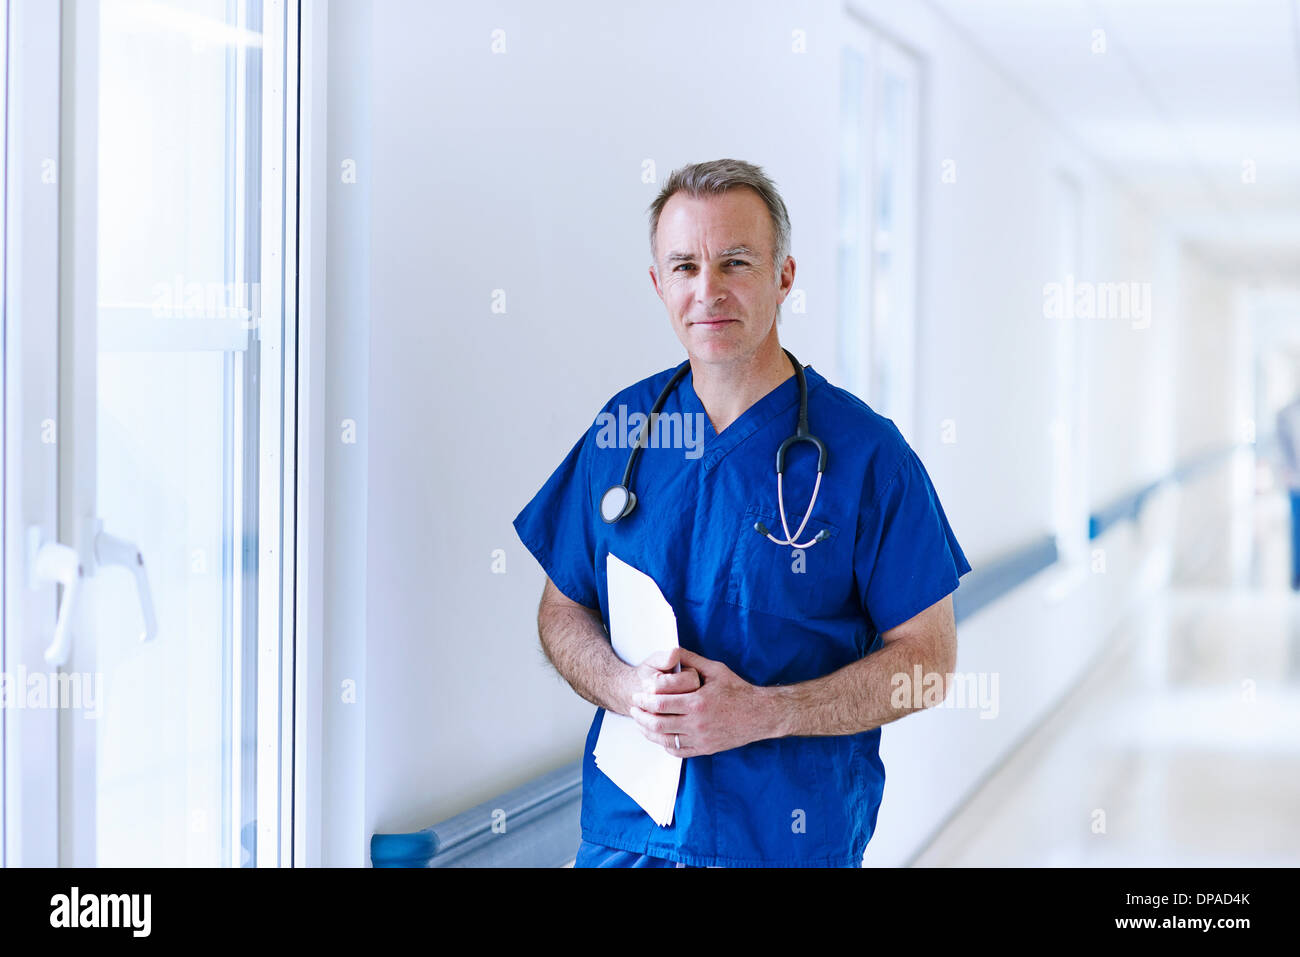 Doctor standing in corridor holding medical records Banque D'Images